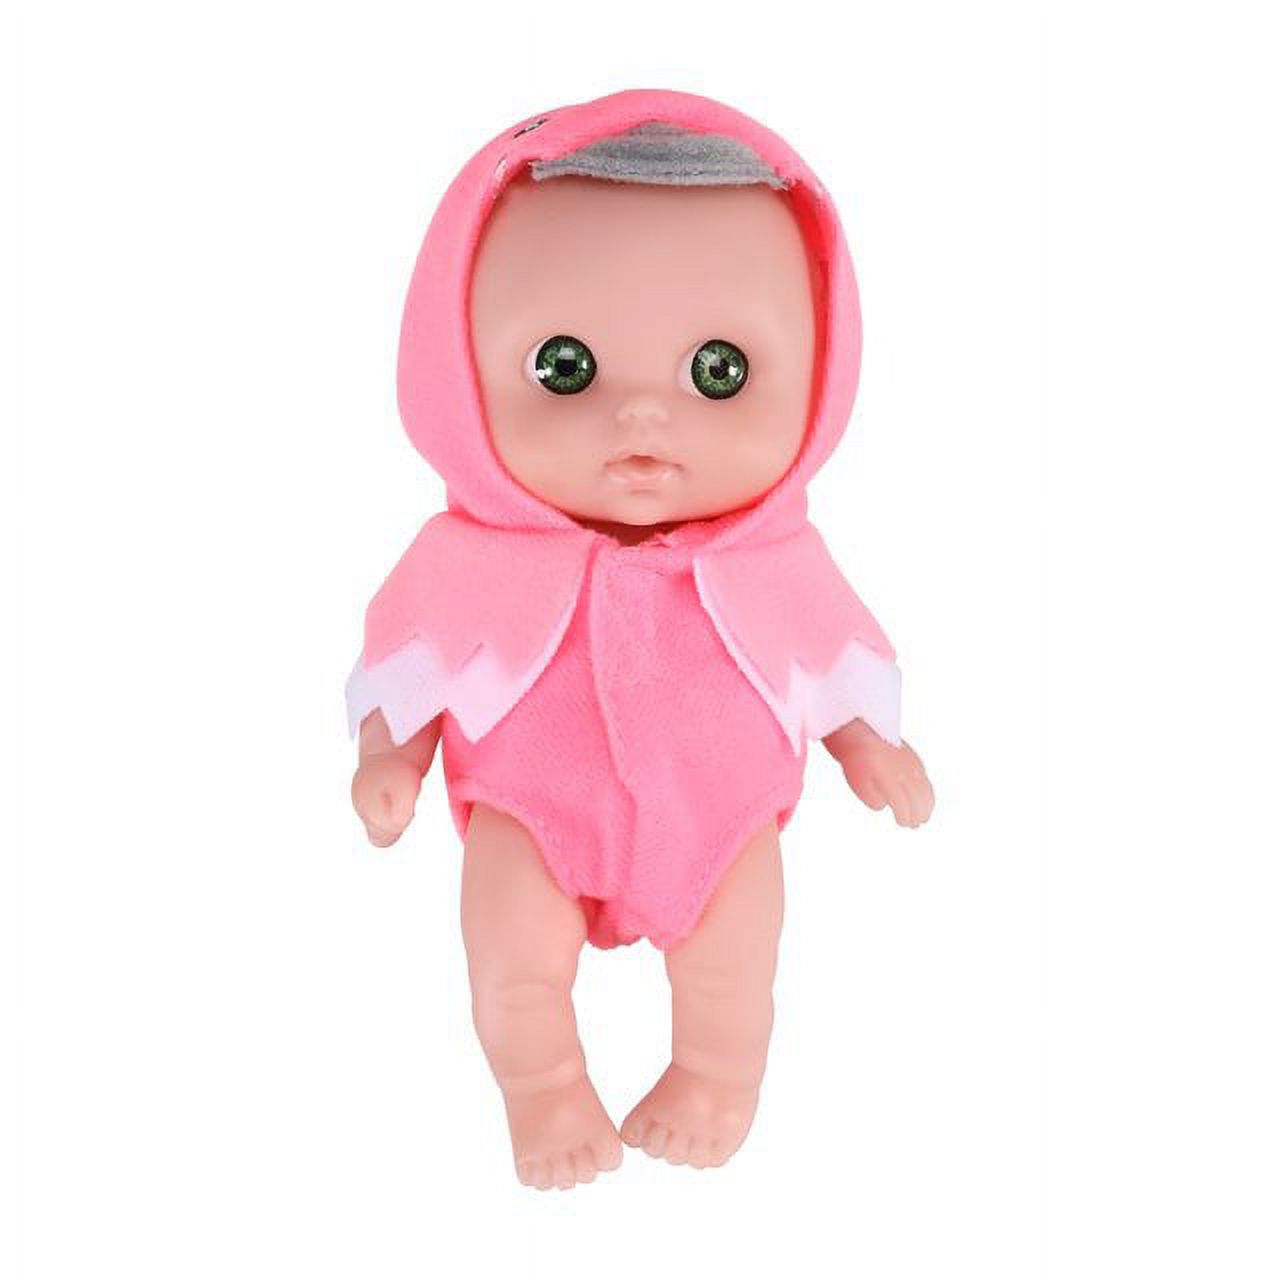 My Sweet Love Lil Cuties 5" Tall Baby Doll with Removable Outfit - image 4 of 5